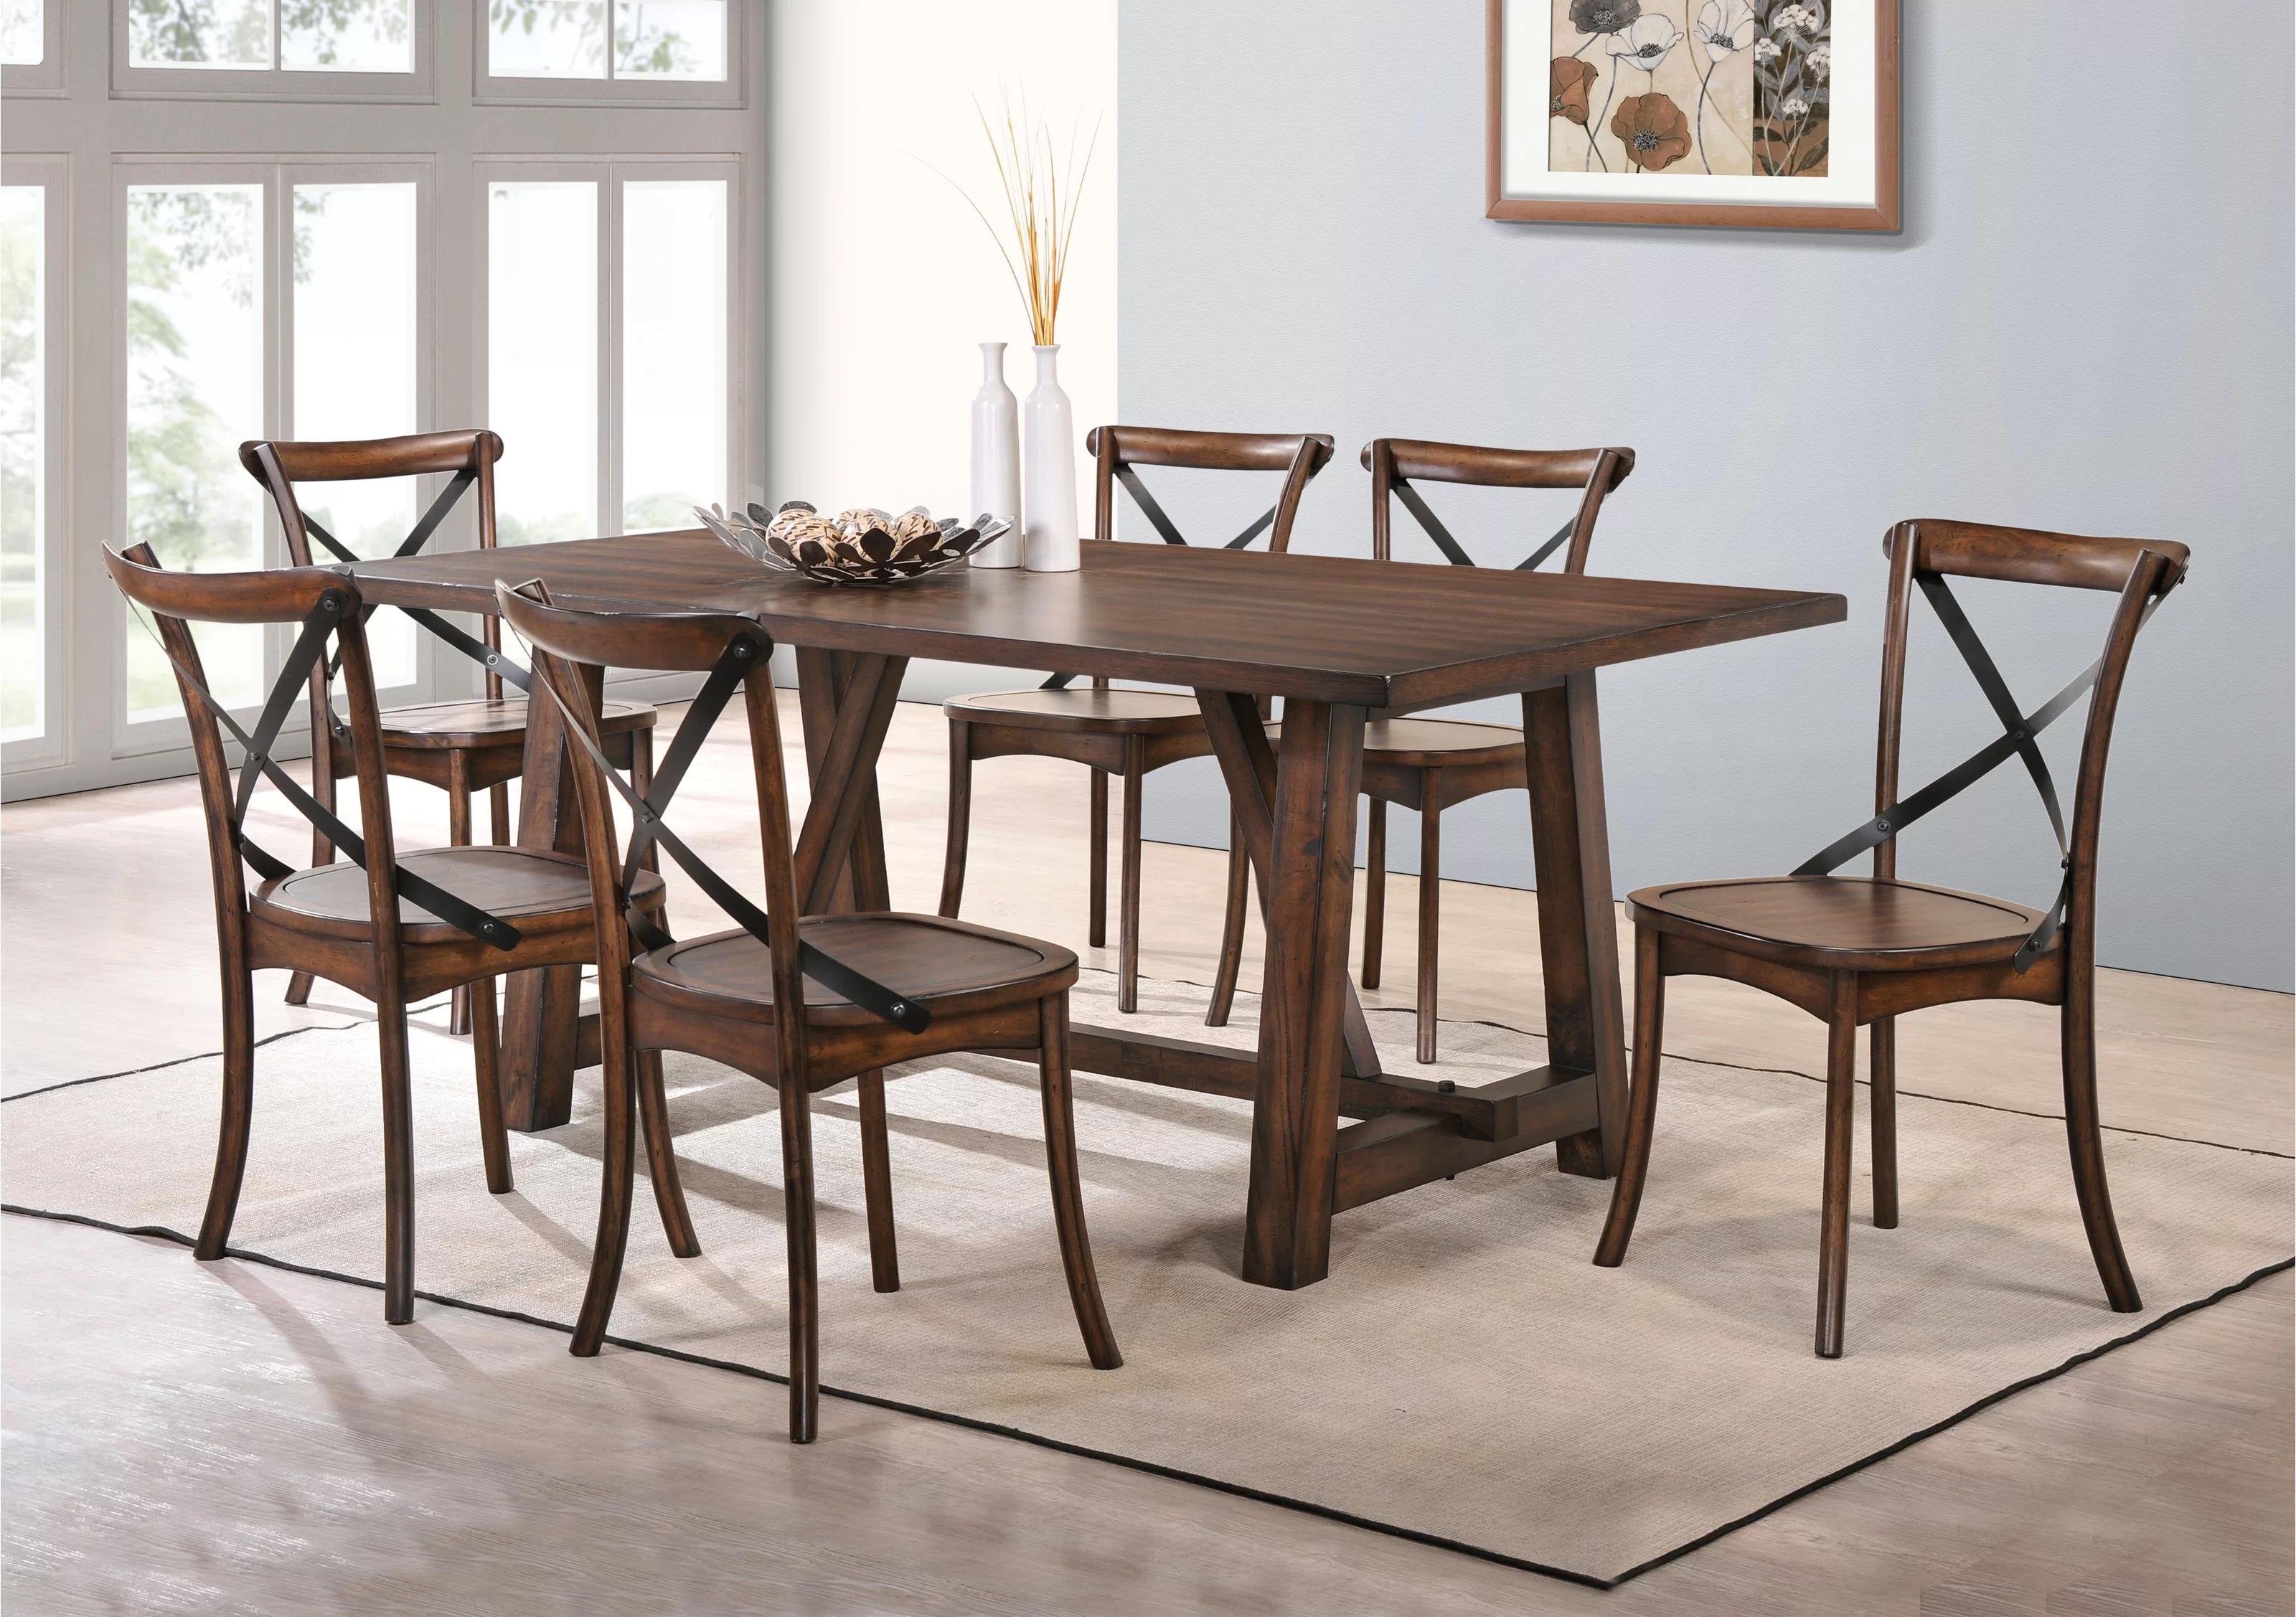 

    
Rustic Dark Oak Dining Table + 6x Chairs by Acme Kaelyn 73030-7pcs
